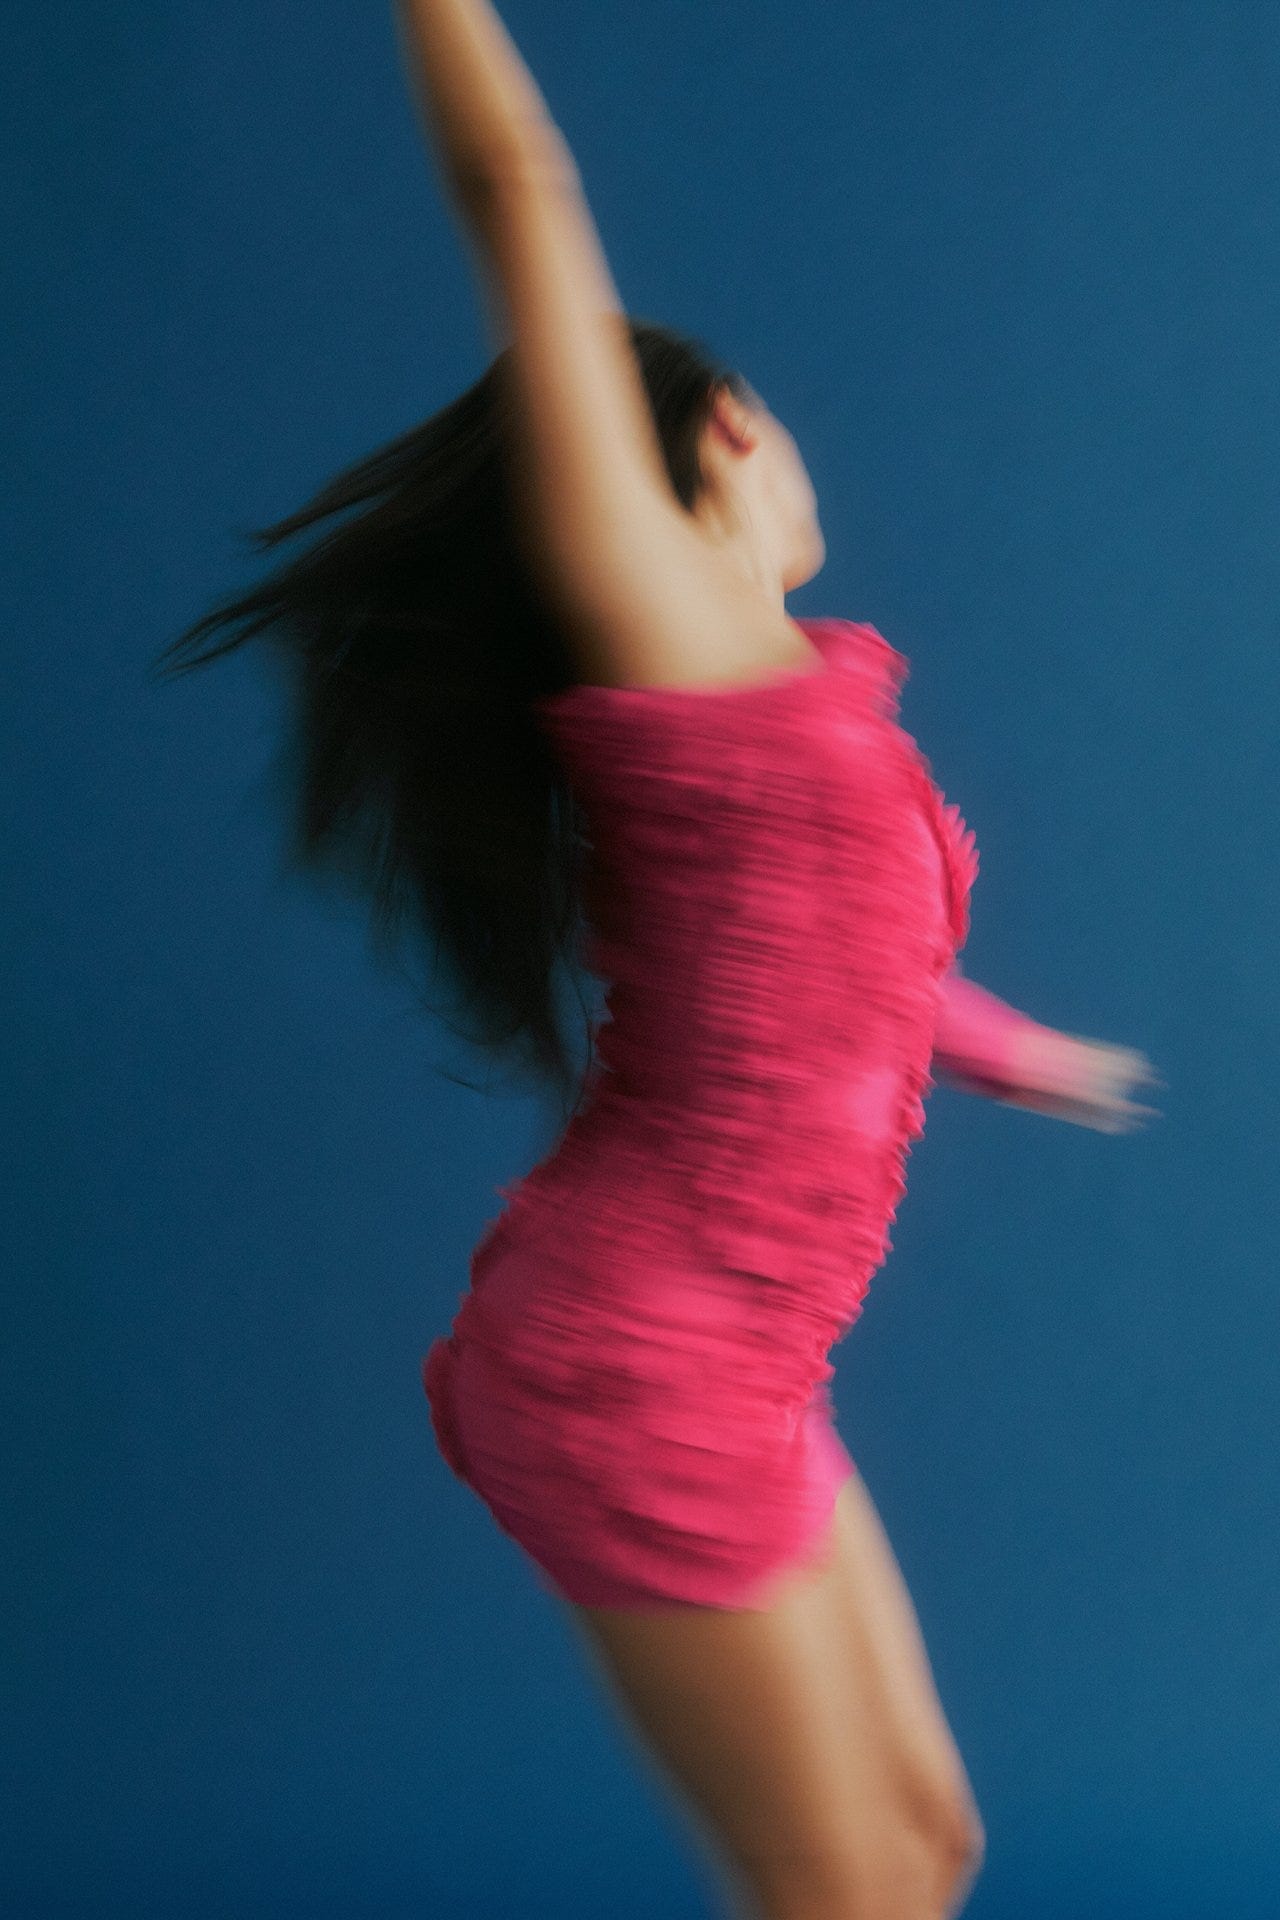 A woman dressed in hot pink dances in a blur in front of a denim blue wall